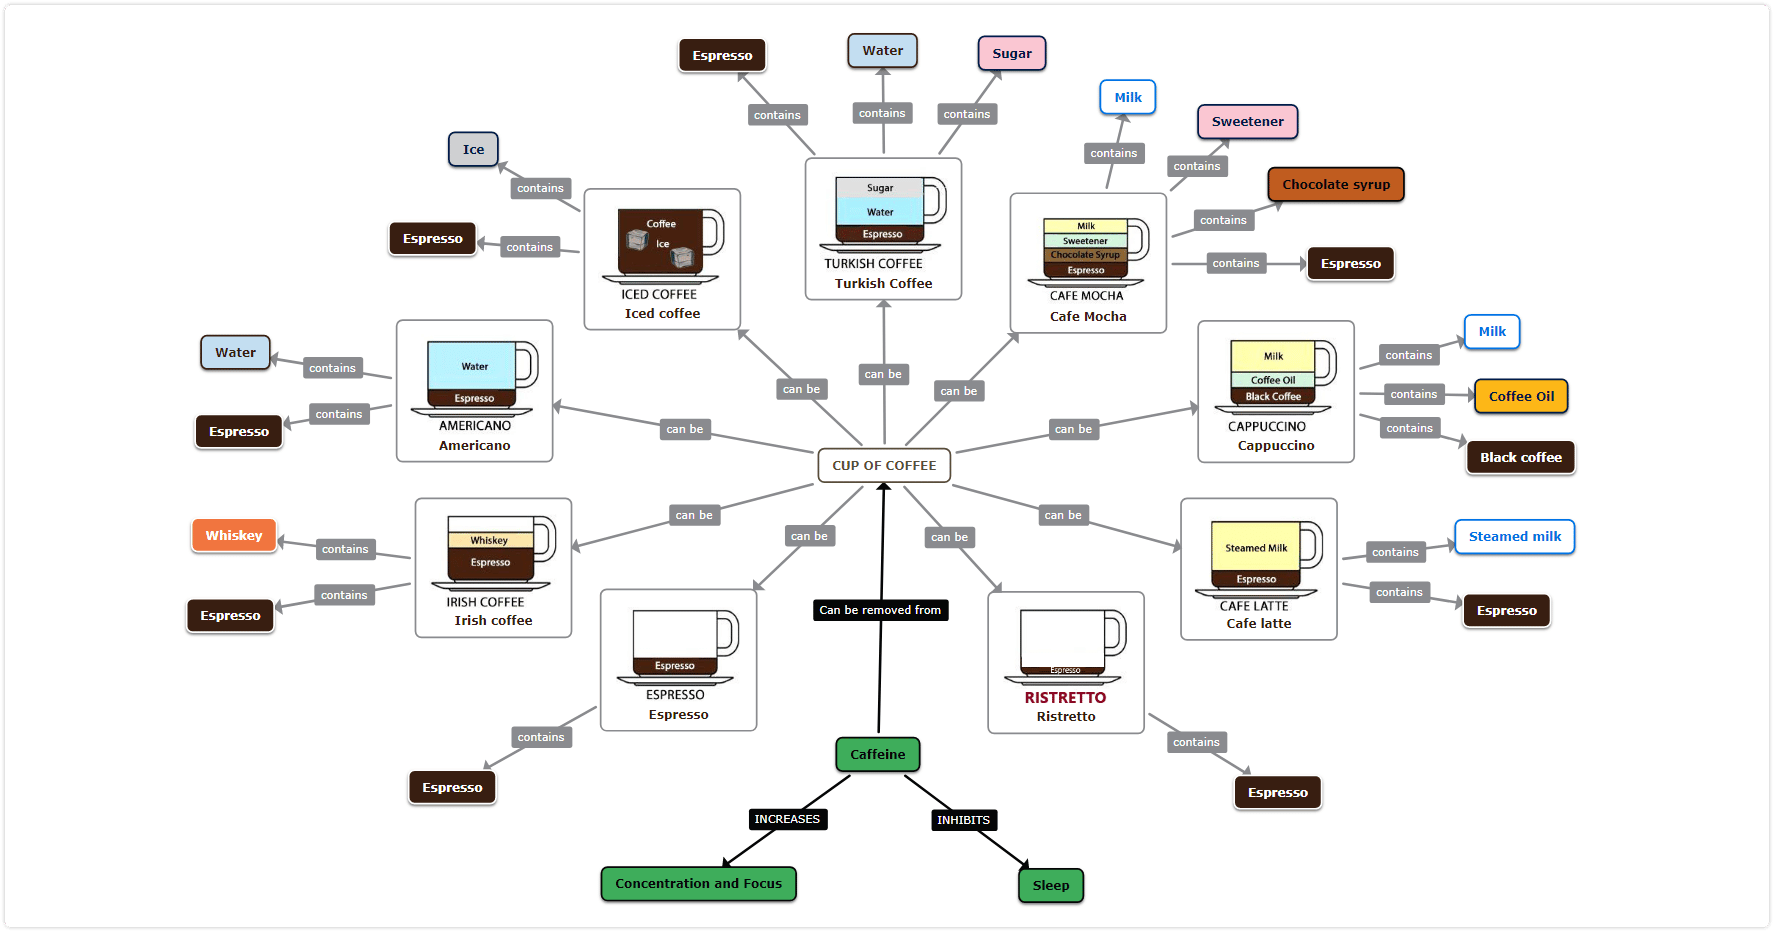 Types of coffee - What is a concept map